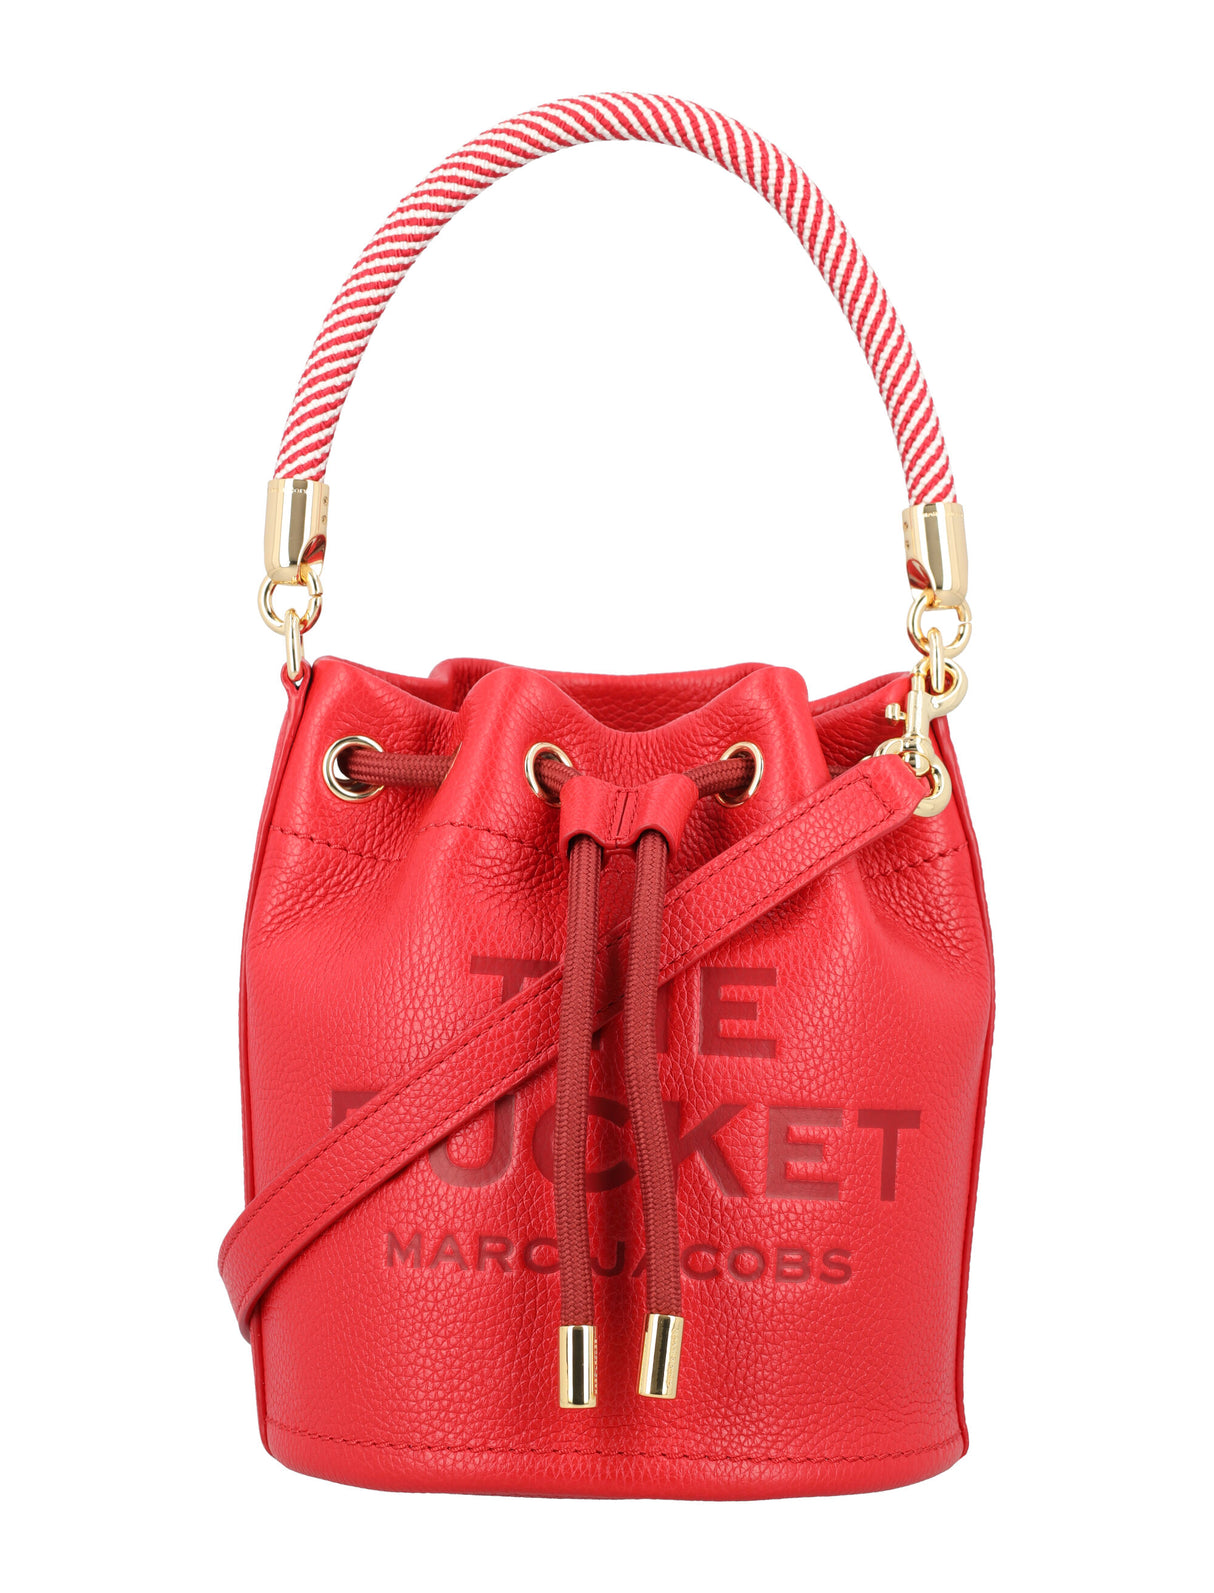 MARC JACOBS The Perfect Accessory: Red Grain Leather Bucket Bag for Women